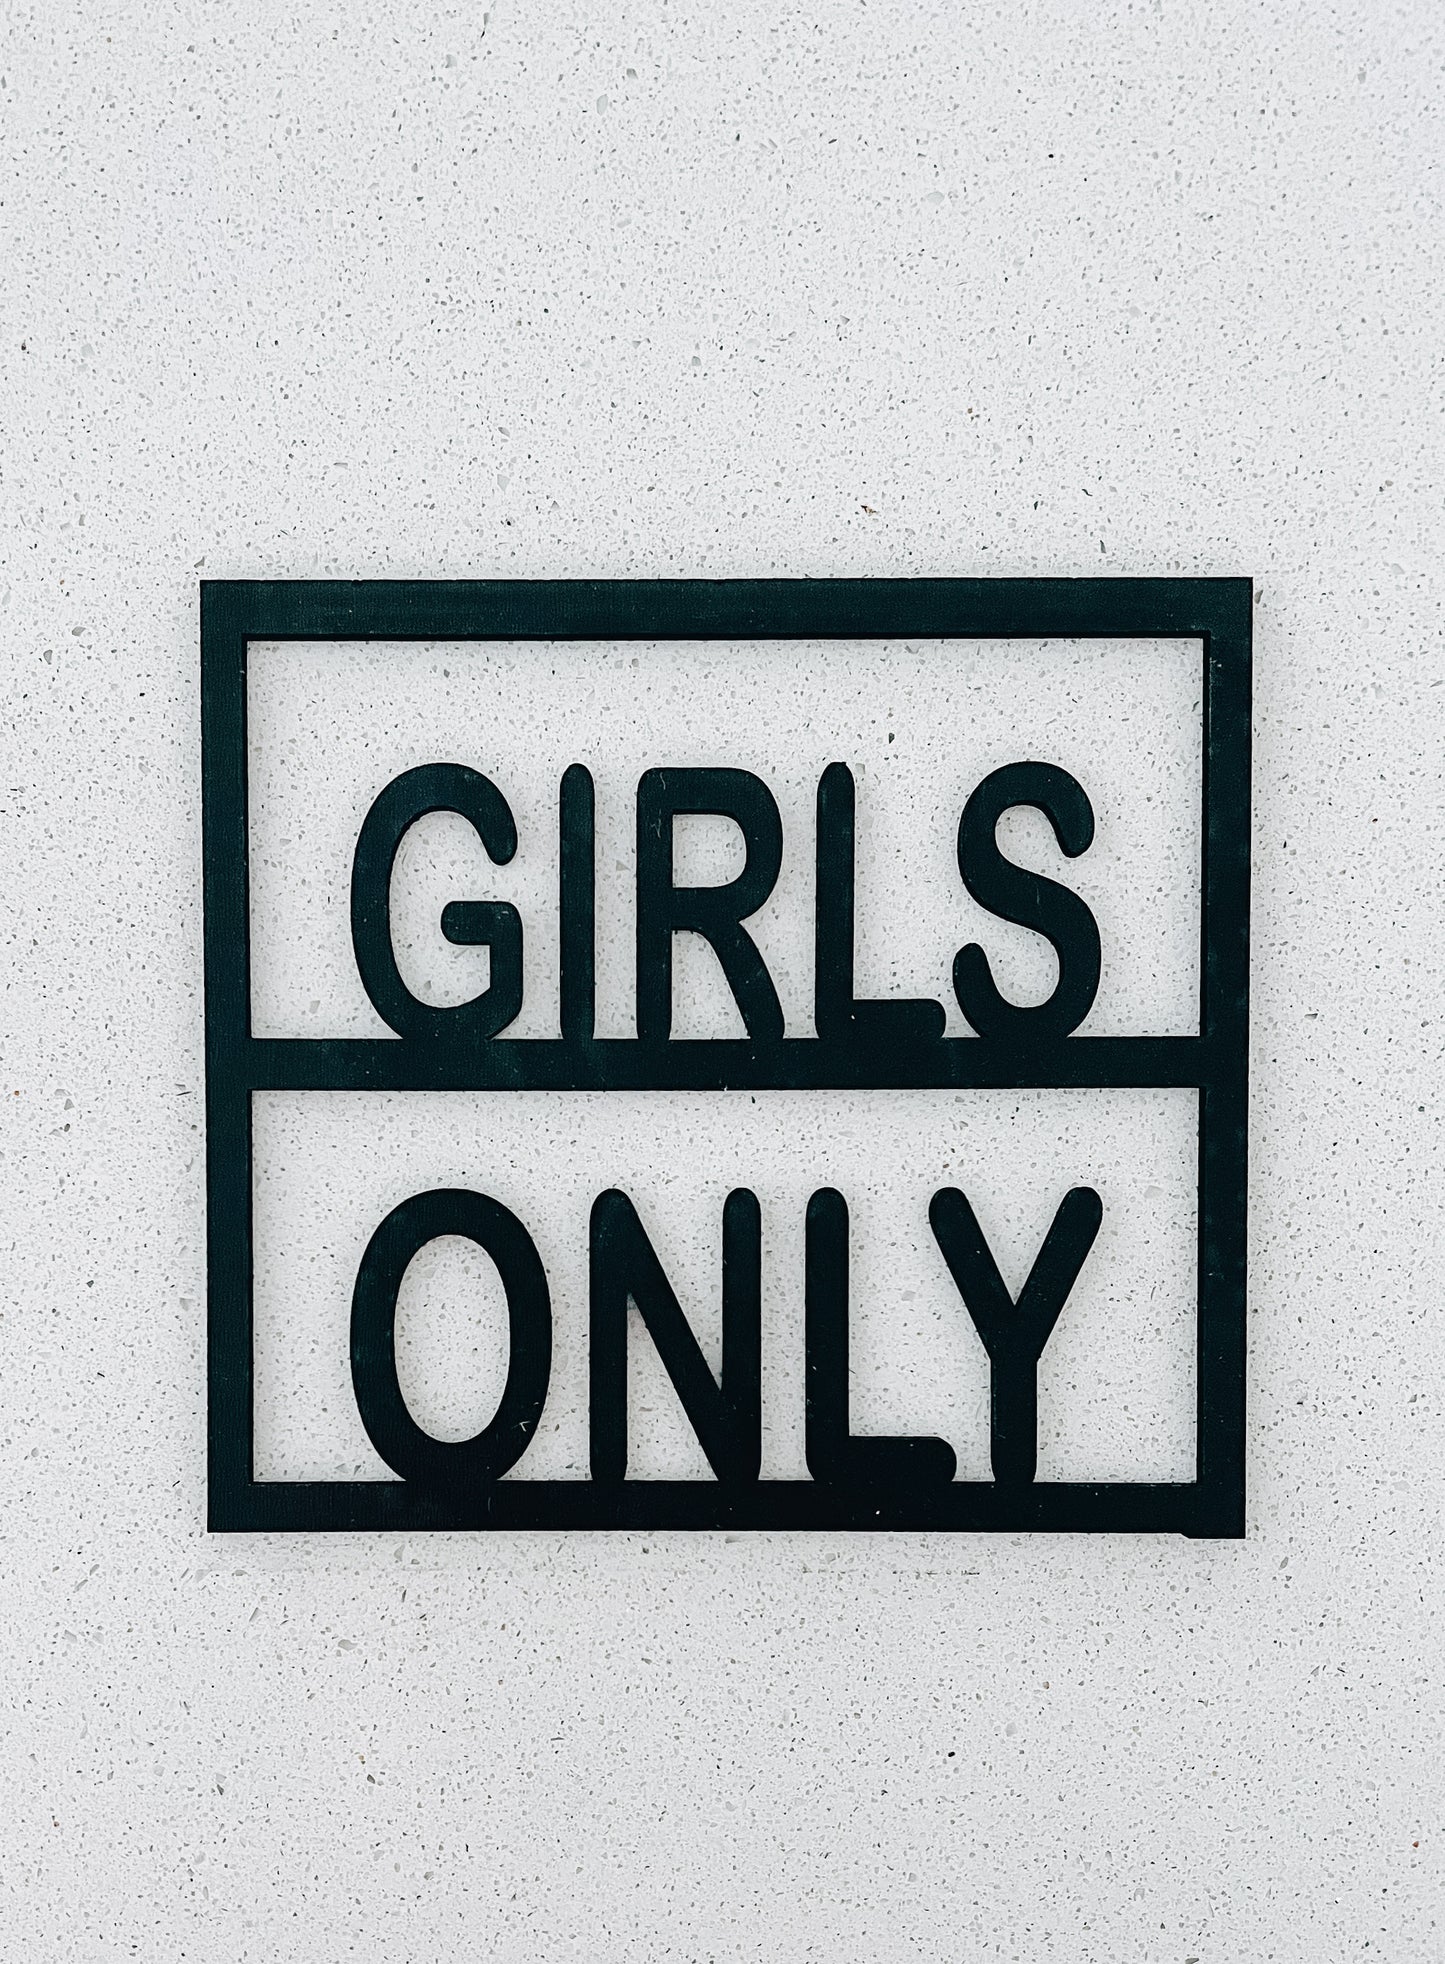 Boys Only - Girls Only